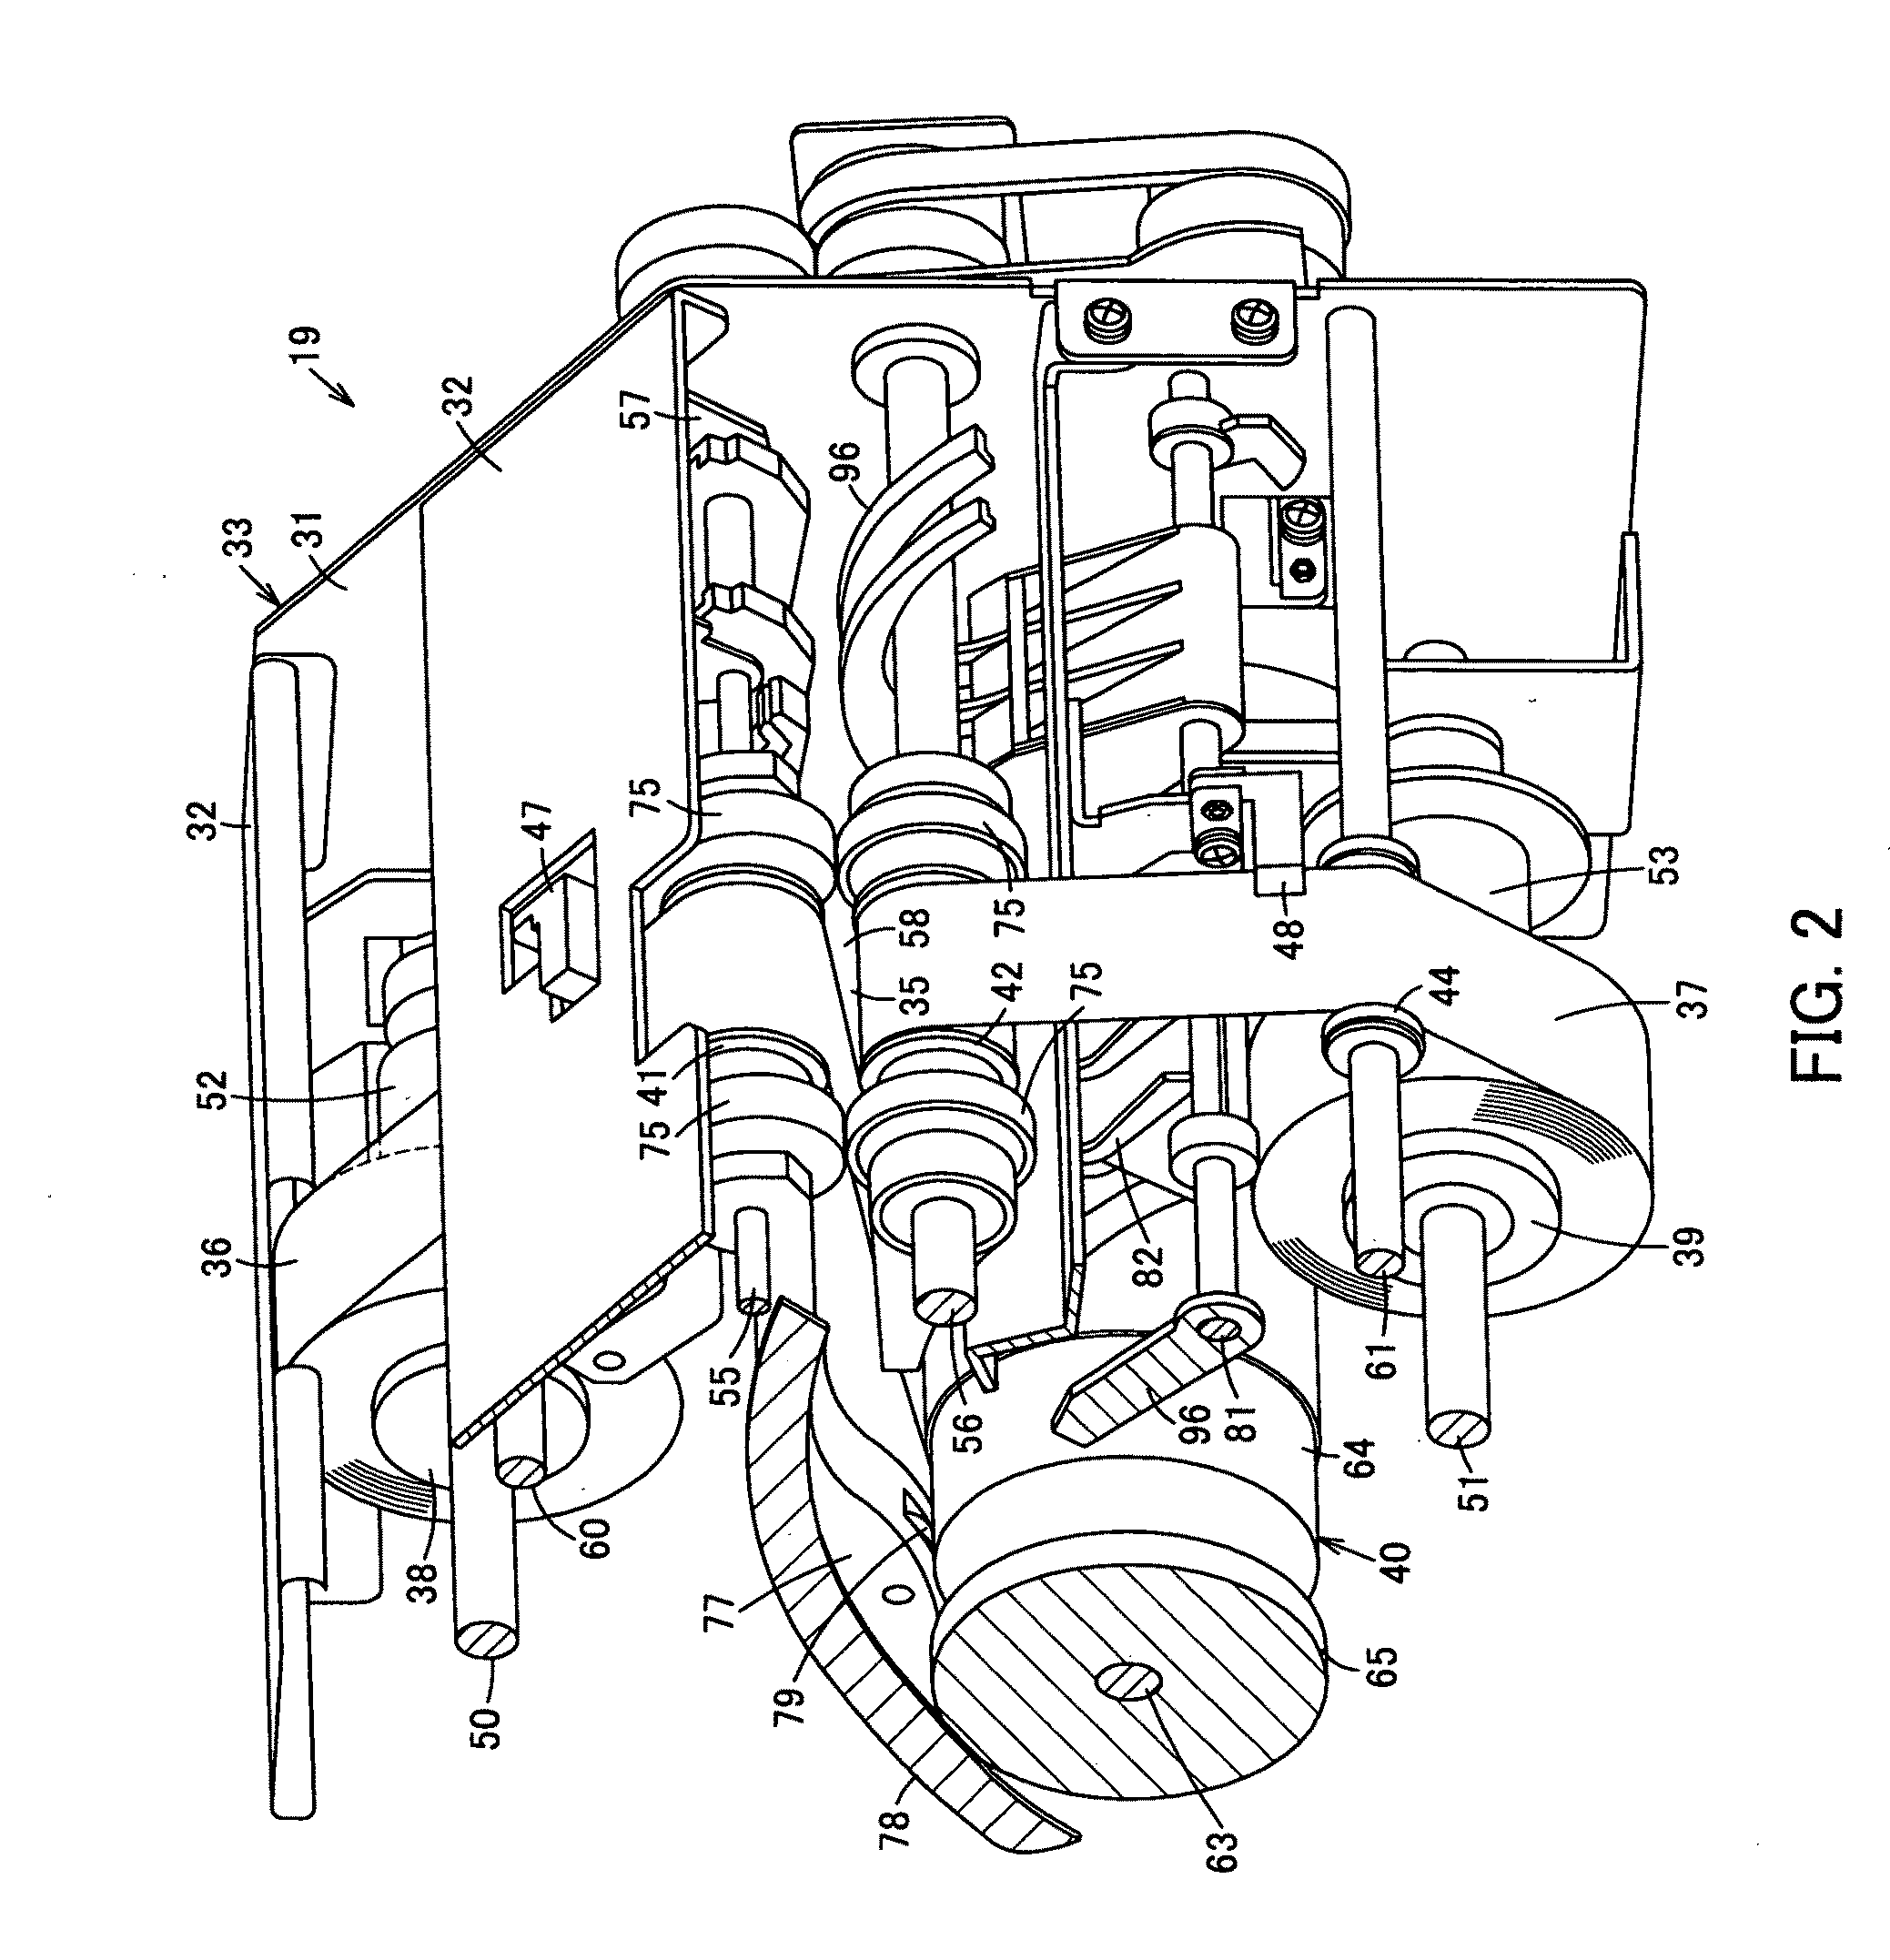 Paper sheet storing and feeding unit